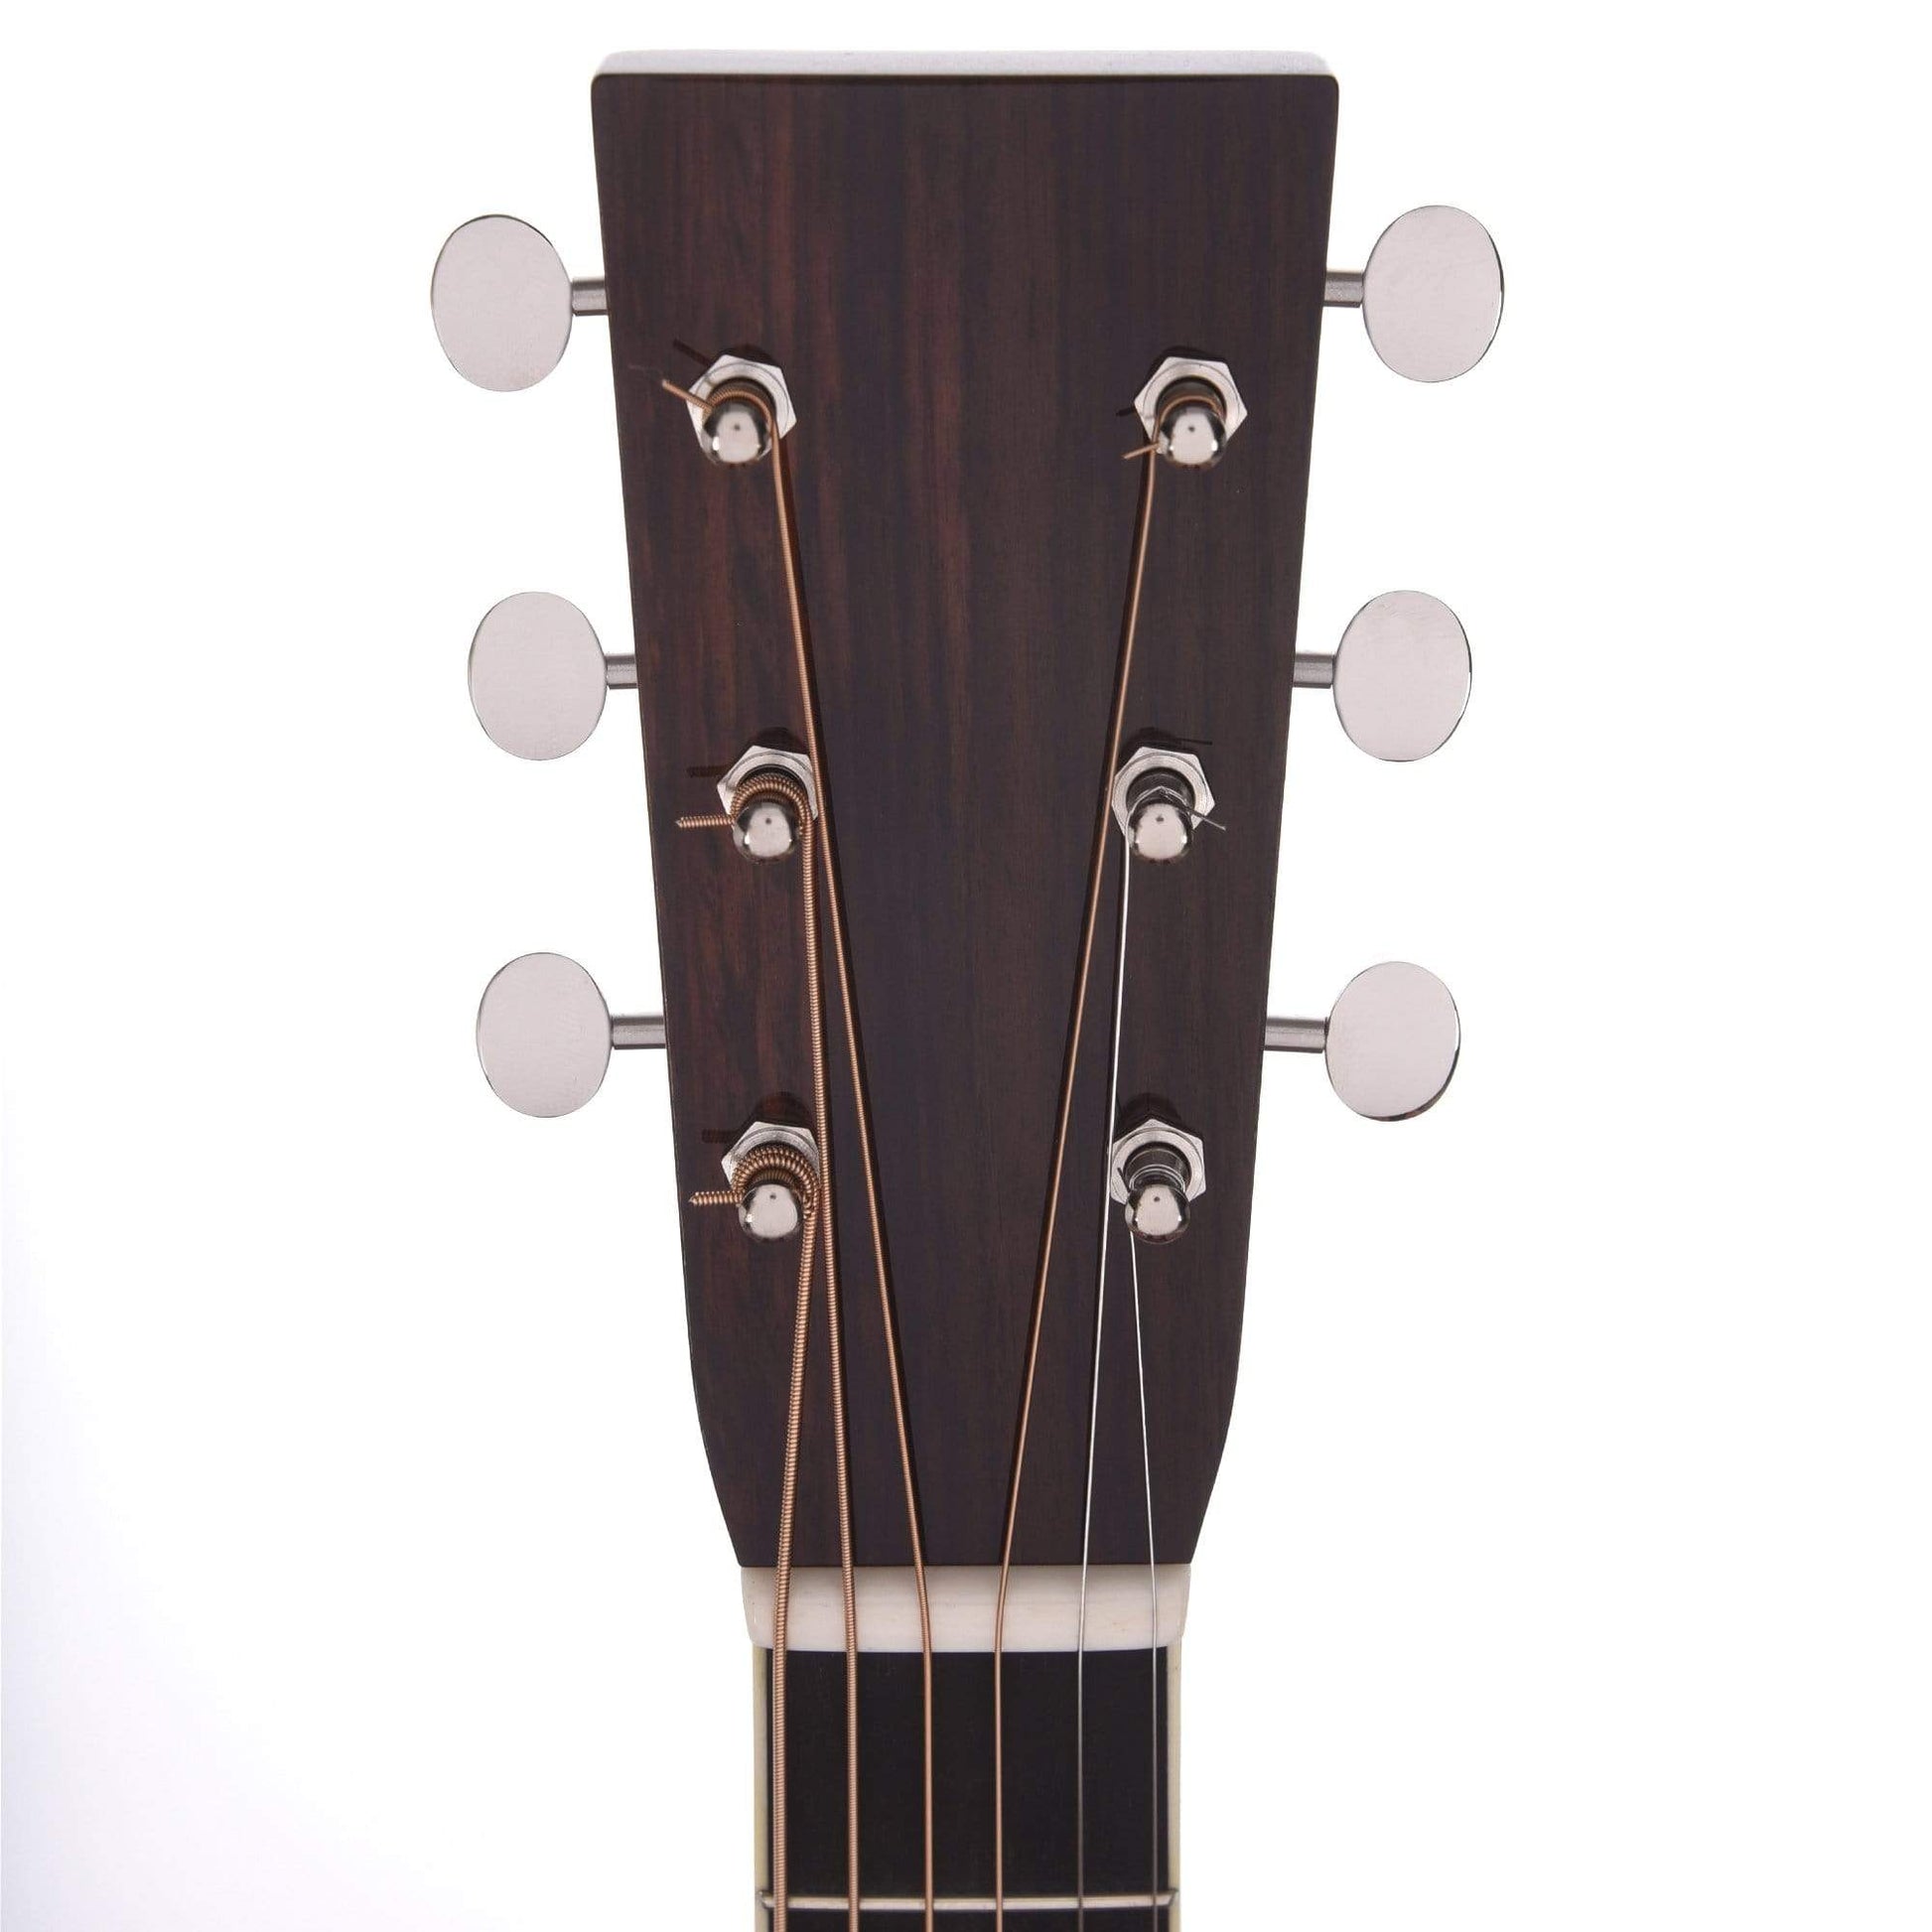 Huss & Dalton TD-R The Pilgrim Thermo-Cured Sitka/Rosewood w/Oval Tuners Acoustic Guitars / Dreadnought